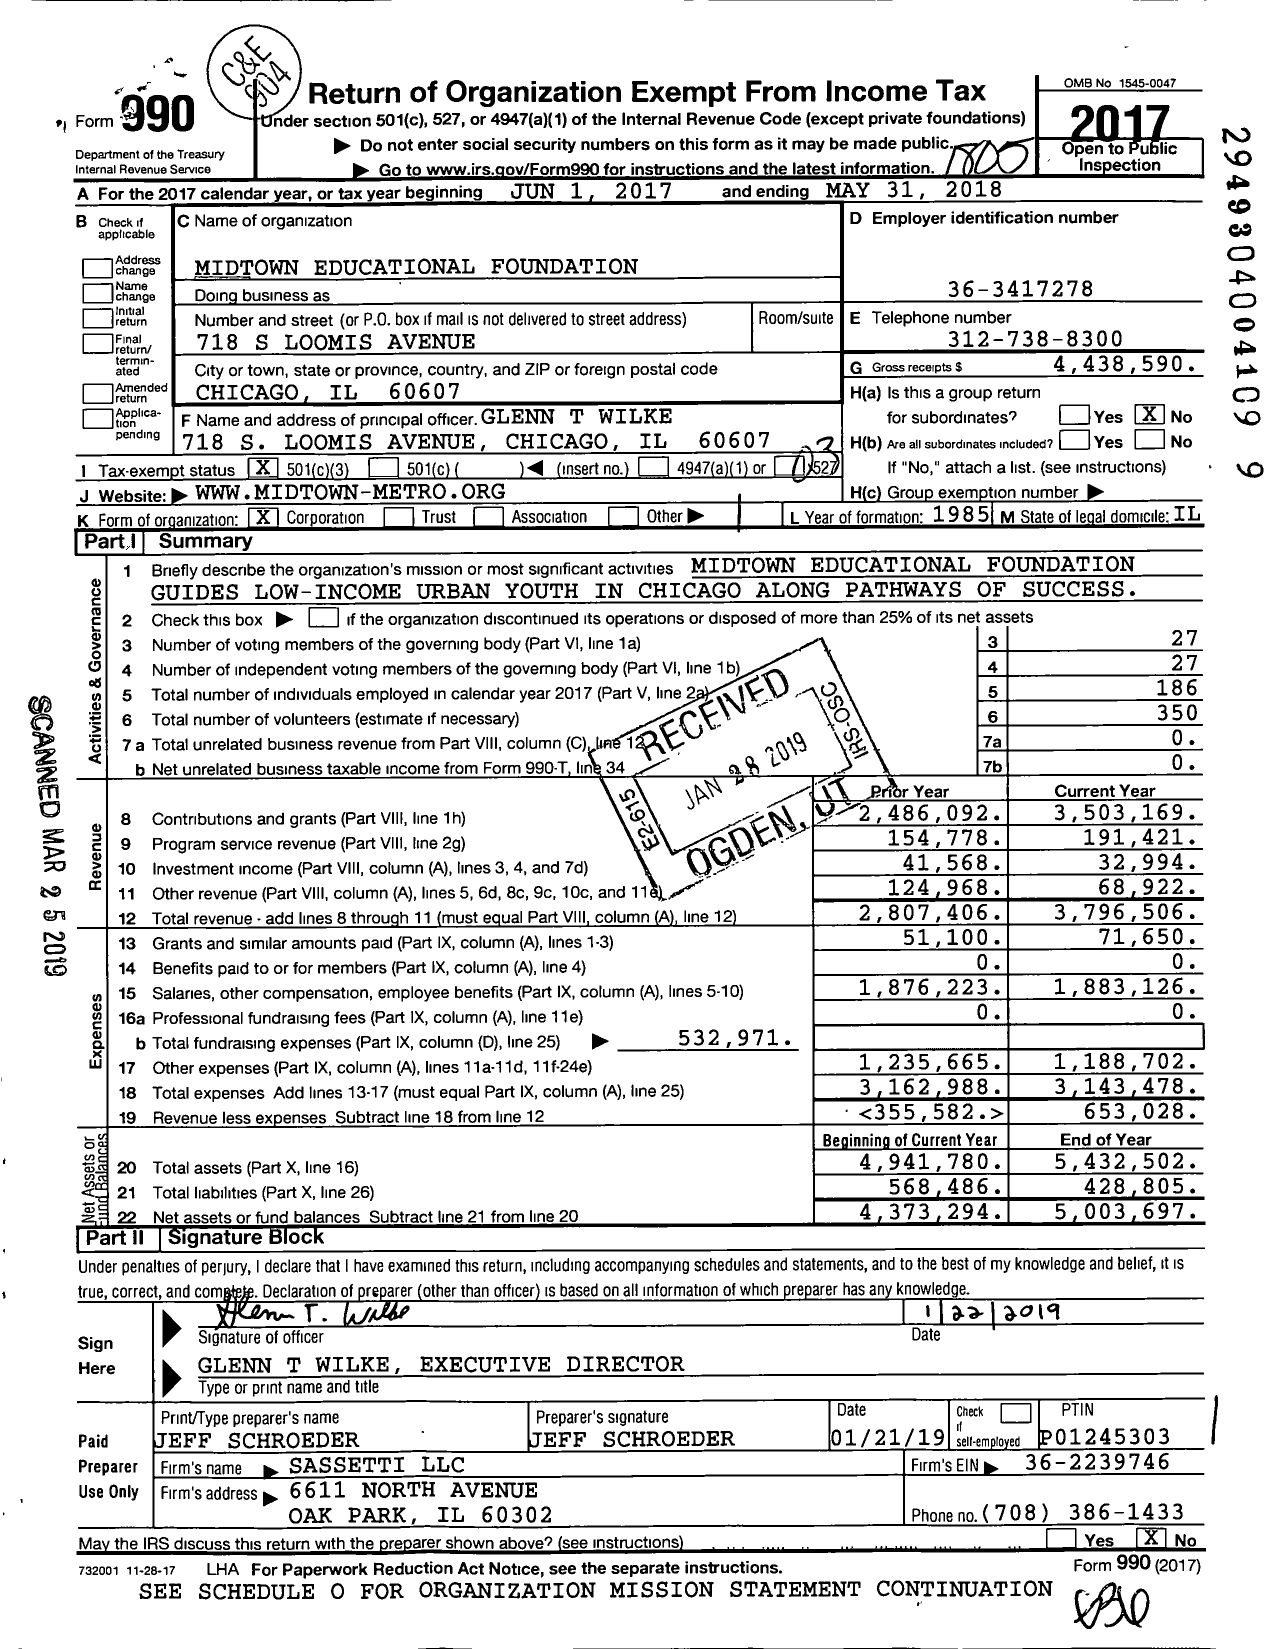 Image of first page of 2017 Form 990 for Midtown Educational Foundation (MEF)